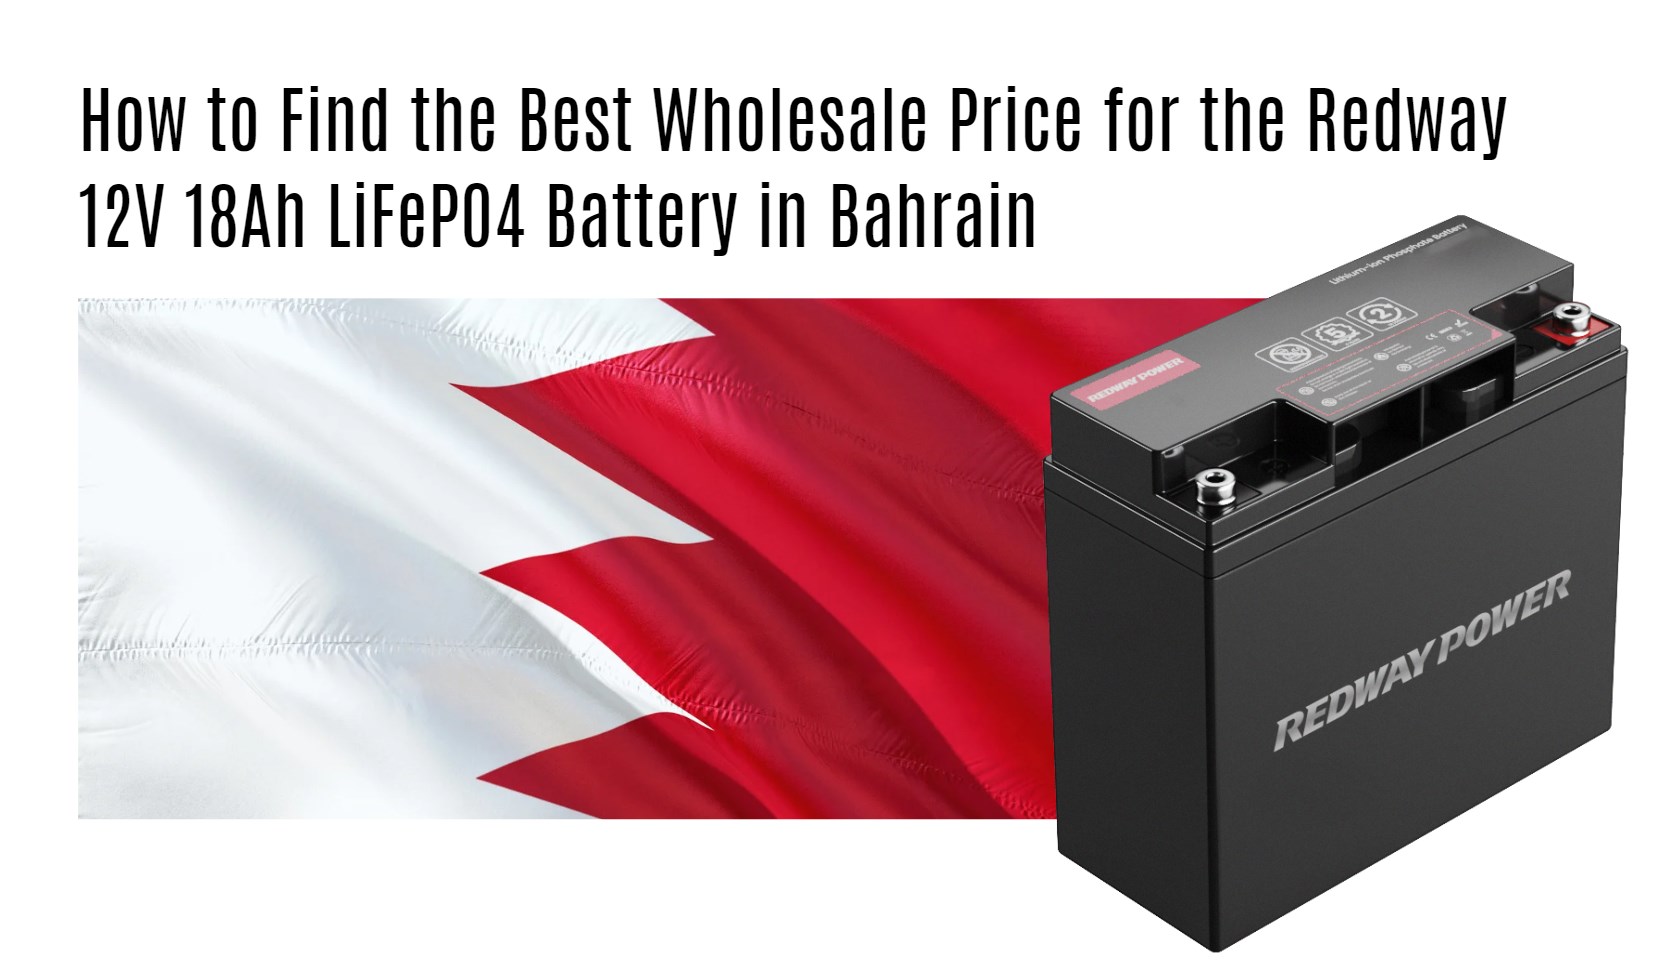 How to Find the Best Wholesale Price for the Redway 12V 18Ah LiFePO4 Battery in Bahrain